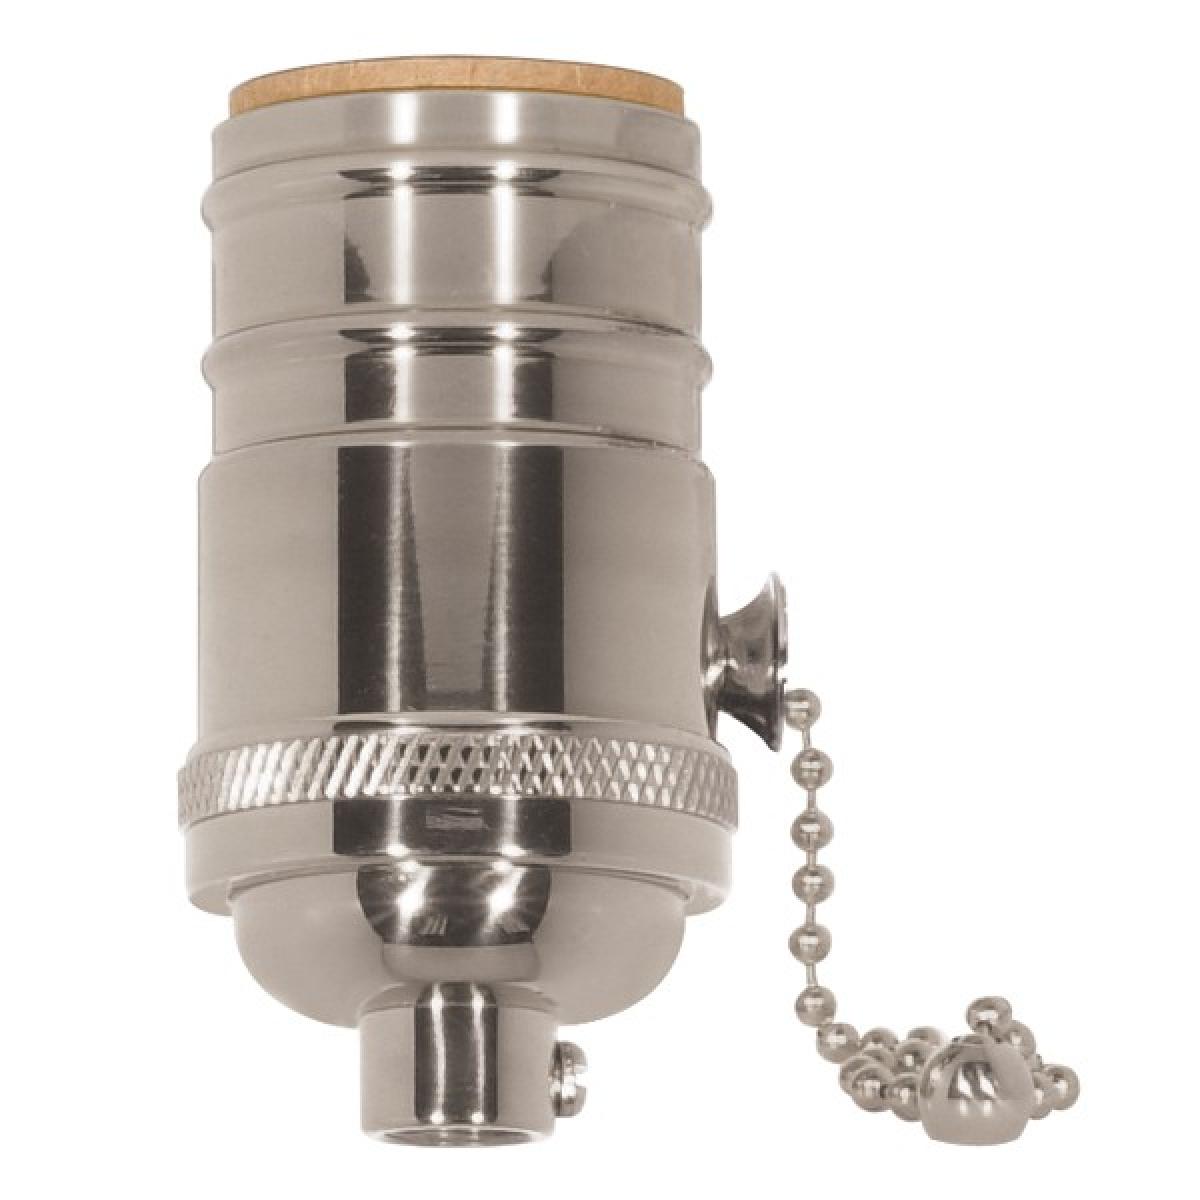 Satco 80-1053 On-Off Pull Chain Socket 1/8 IPS 4 Piece Stamped Solid Brass Polished Nickel Finish 660W 250V